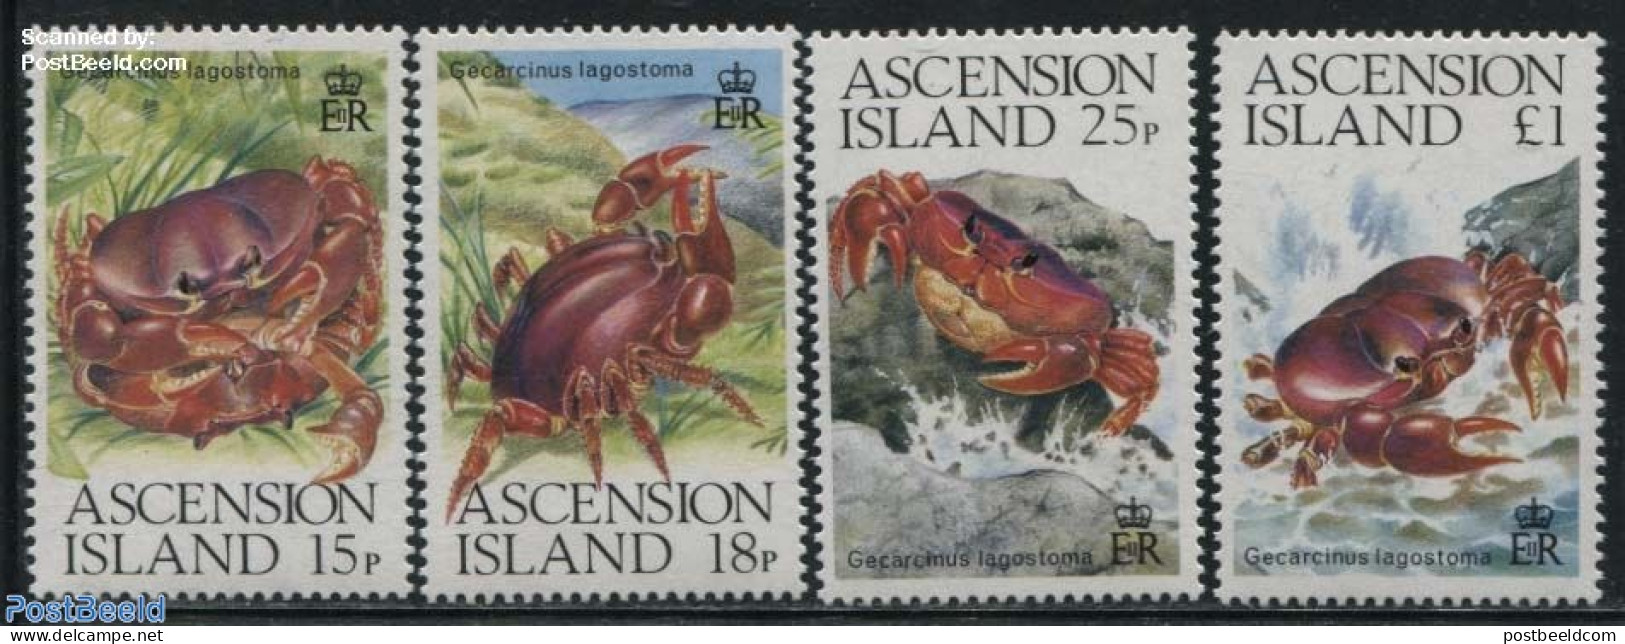 Ascension 1989 Crabs 4v, Mint NH, Nature - Shells & Crustaceans - Crabs And Lobsters - Marine Life